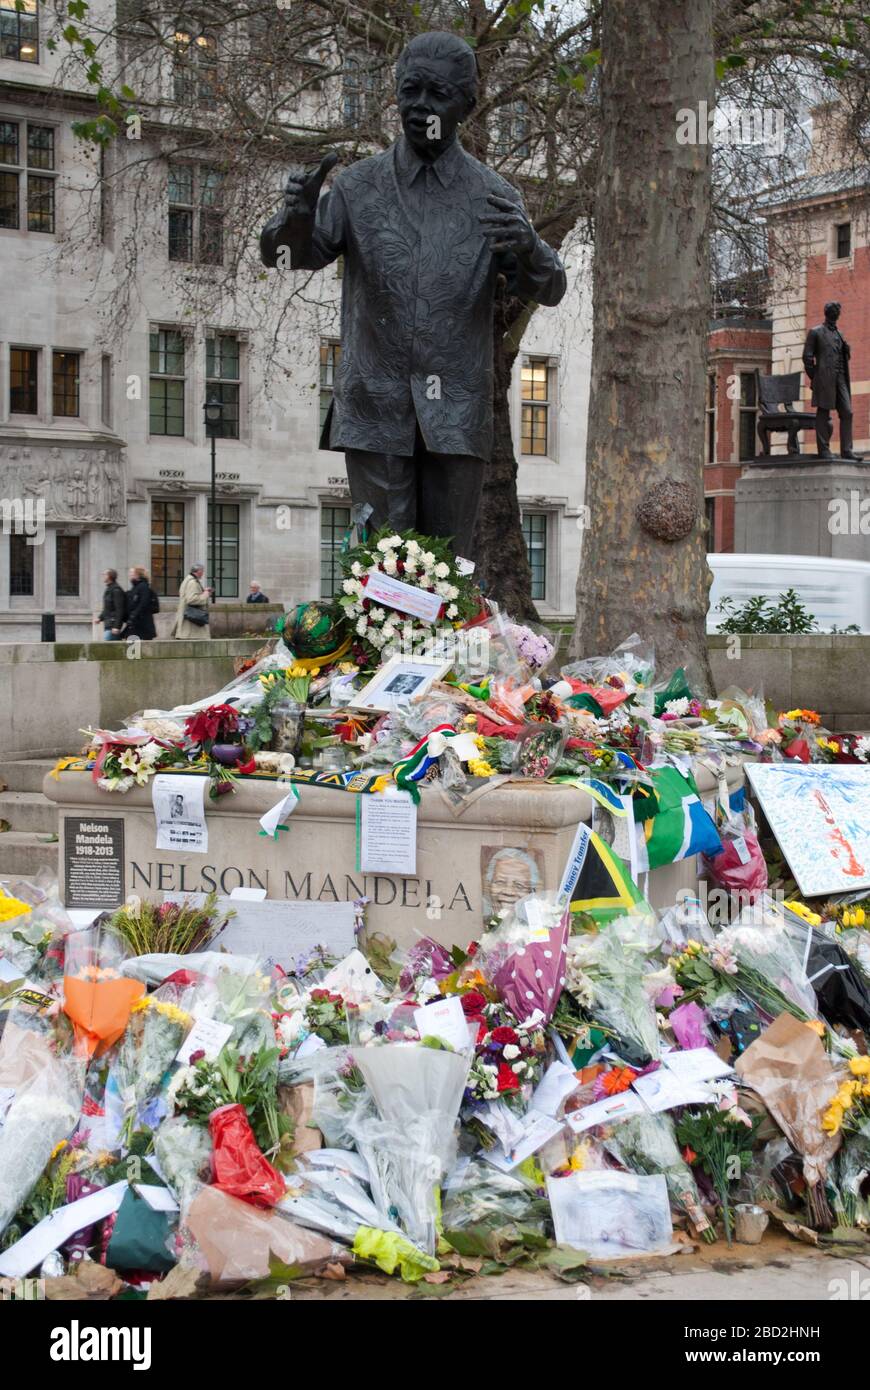 Flowers Tributes Death of Nelson Mandela at Statue in Parliament Square, Westminster, London, SW1P Stock Photo